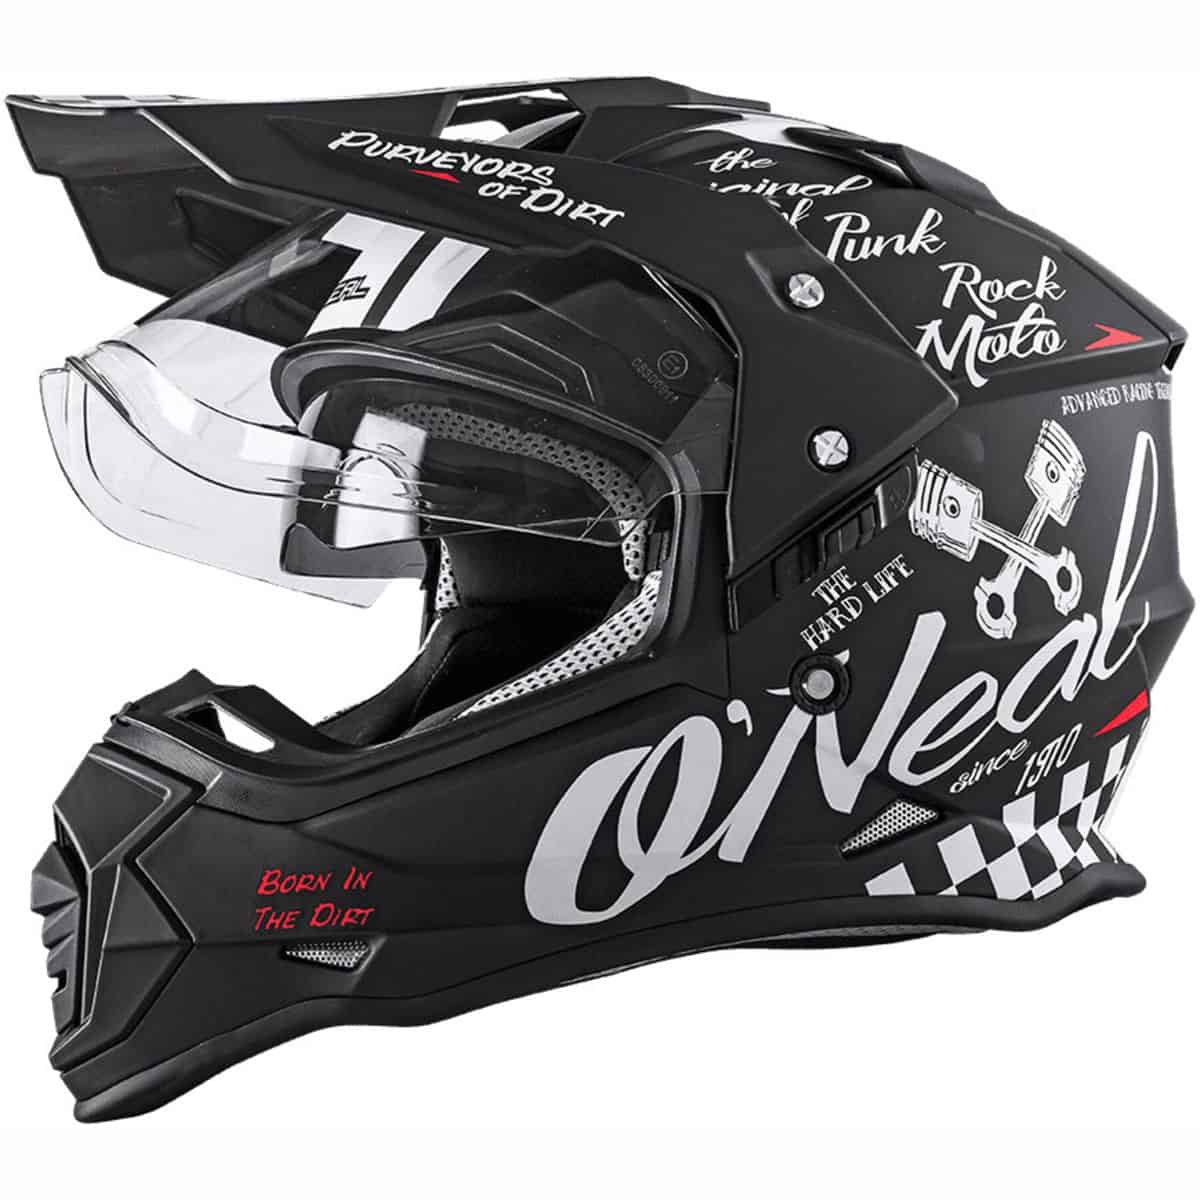 ONeal Sierra Adventure & Trail Helmet: "A great alternative to much more expensive options 1